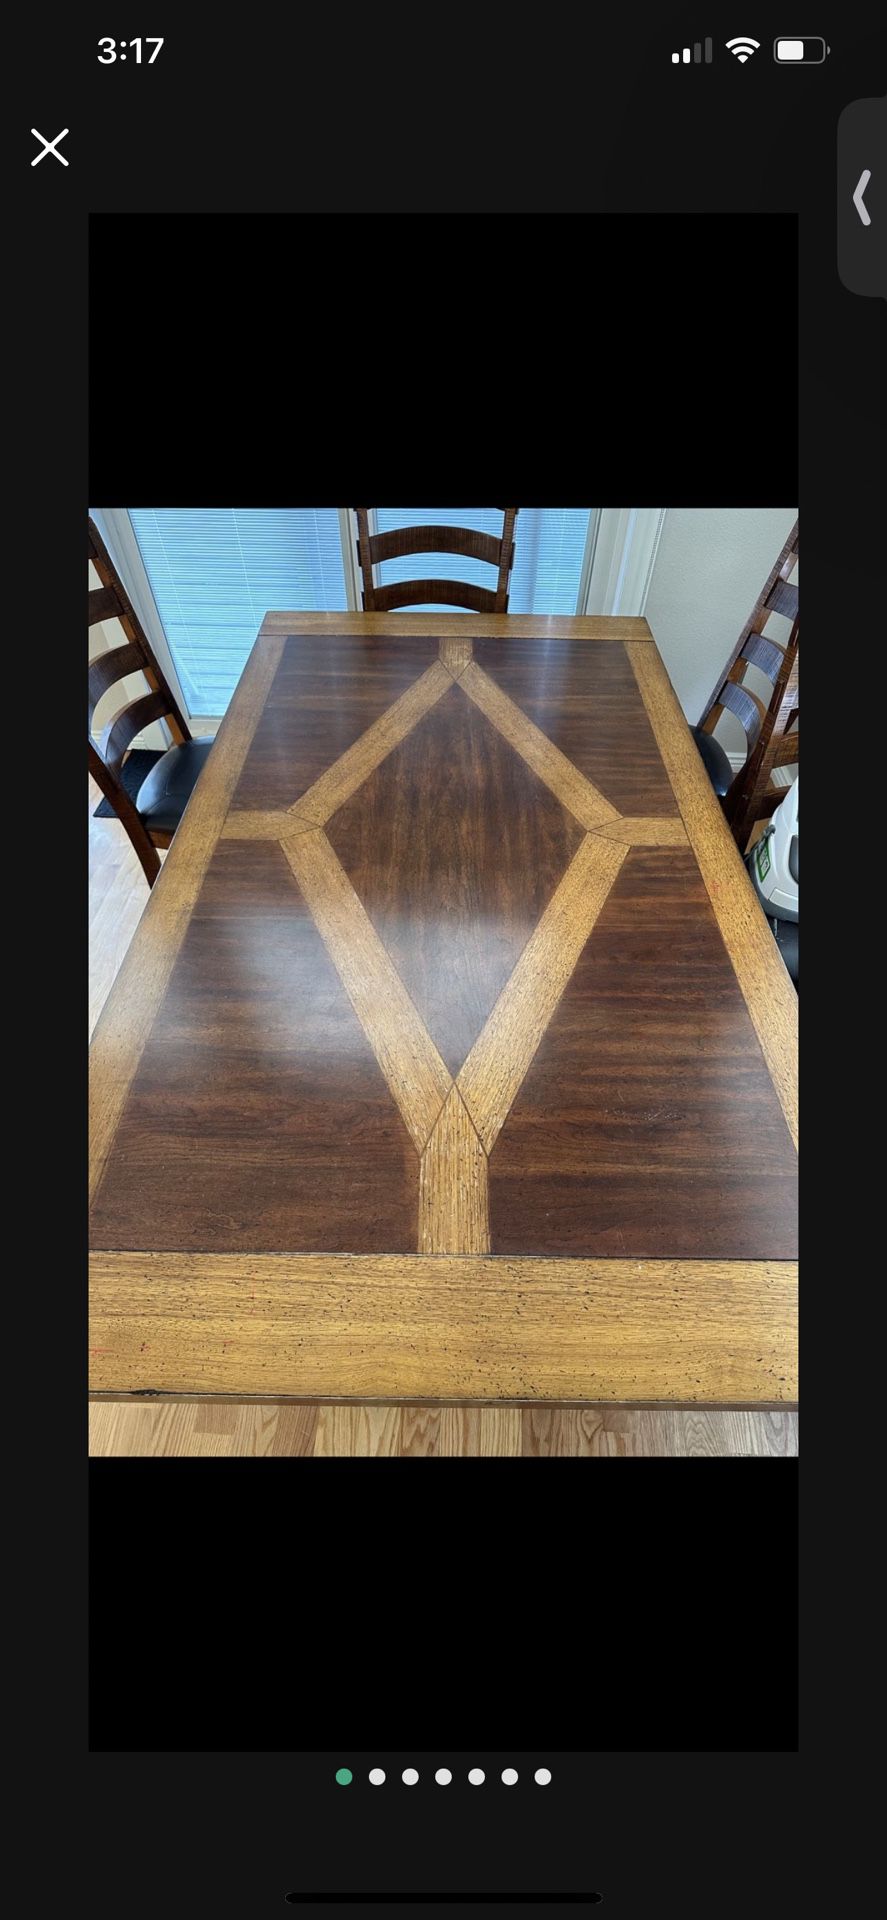 Real Wood American Furniture Table With 6 Chairs. Paid $4000 2 Years Ago